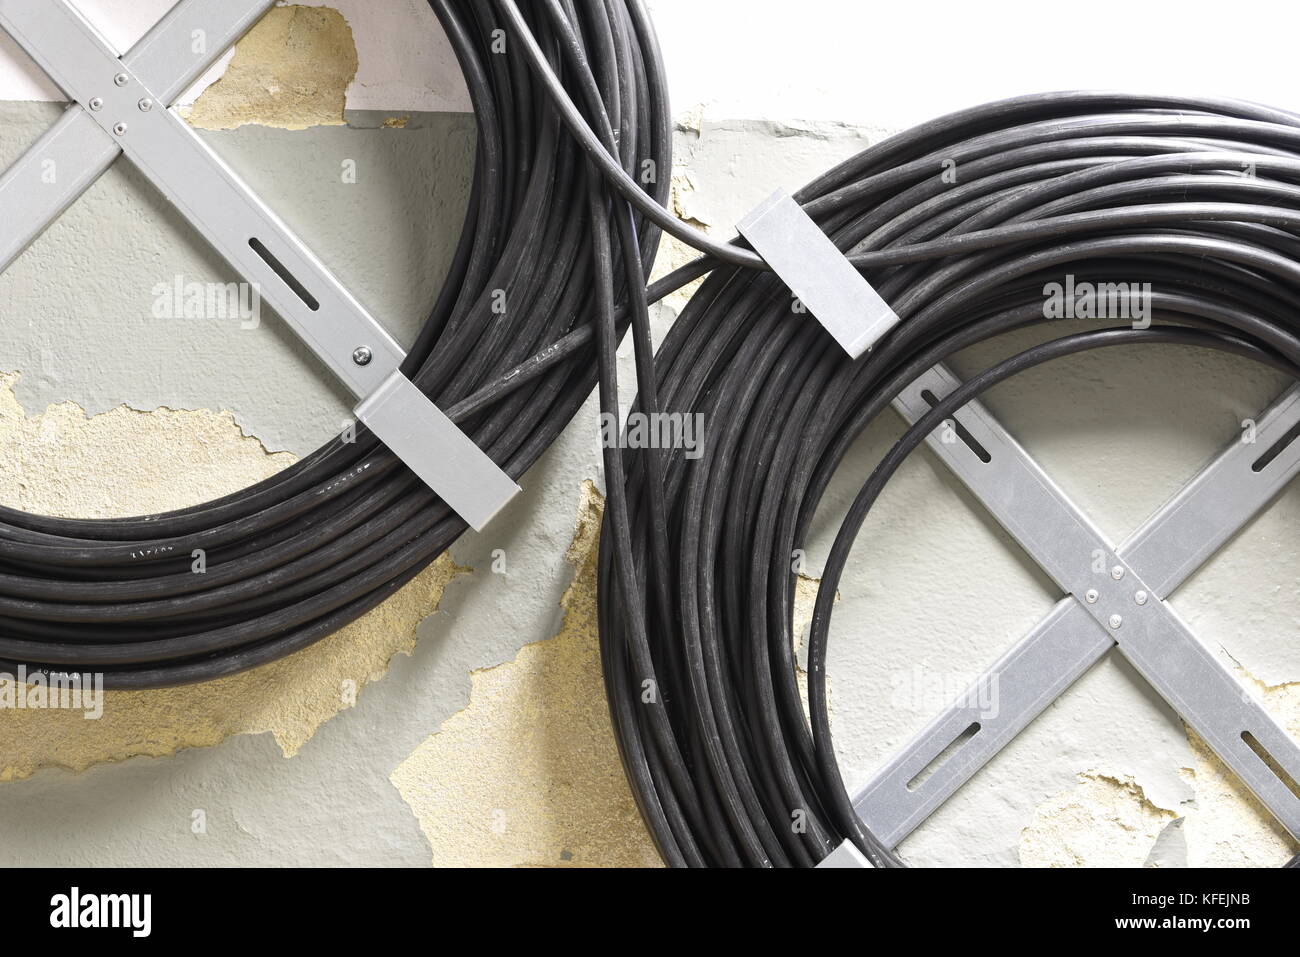 Telecommunication cable reserve on the wall Stock Photo